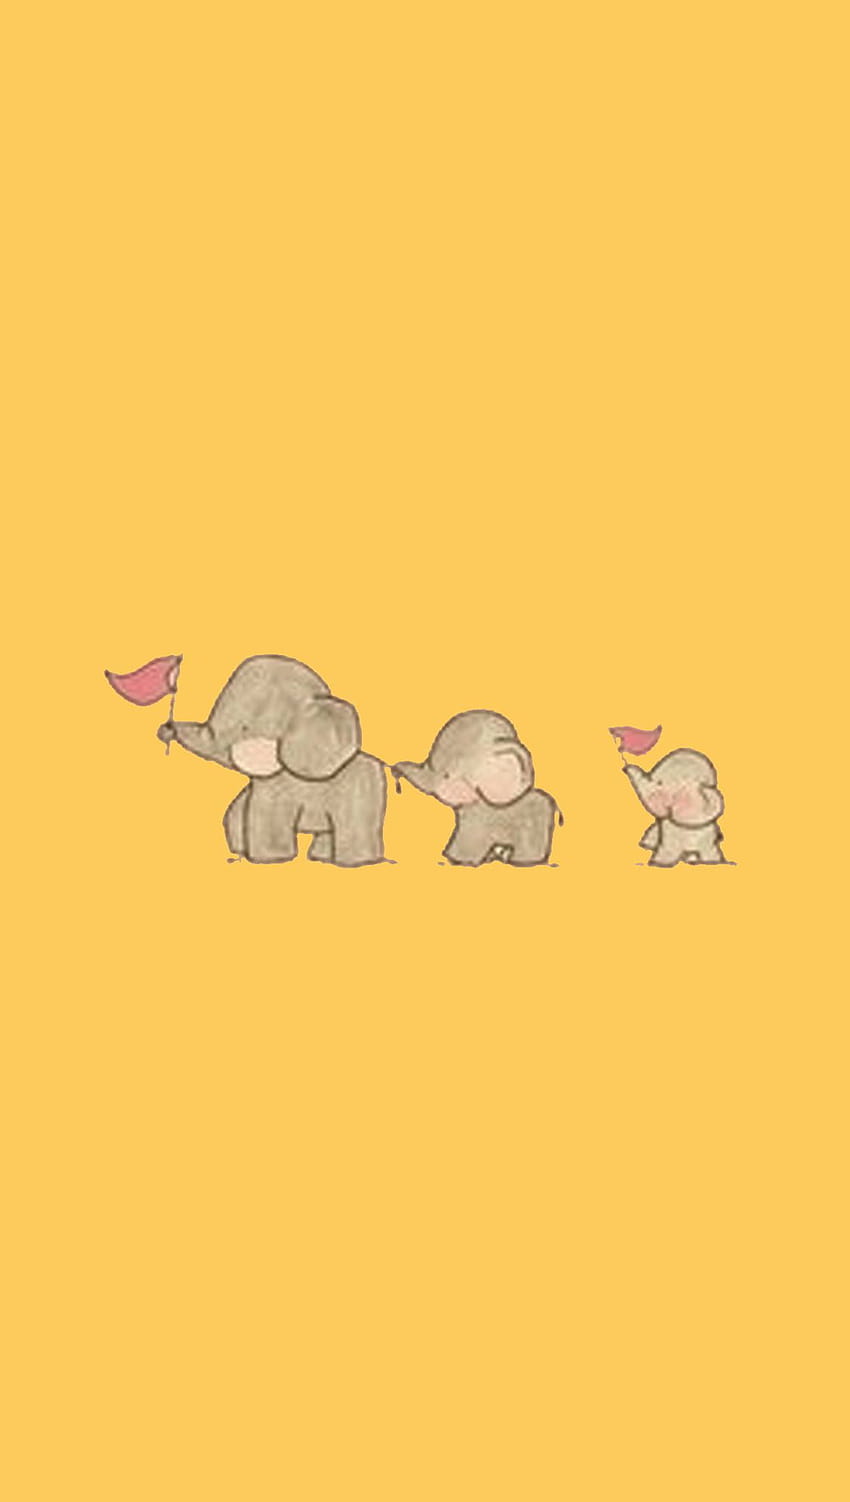 Cute Blue Elephant Wallpaper Stock Illustration  Download Image Now   Animal Anniversary Arrival  iStock